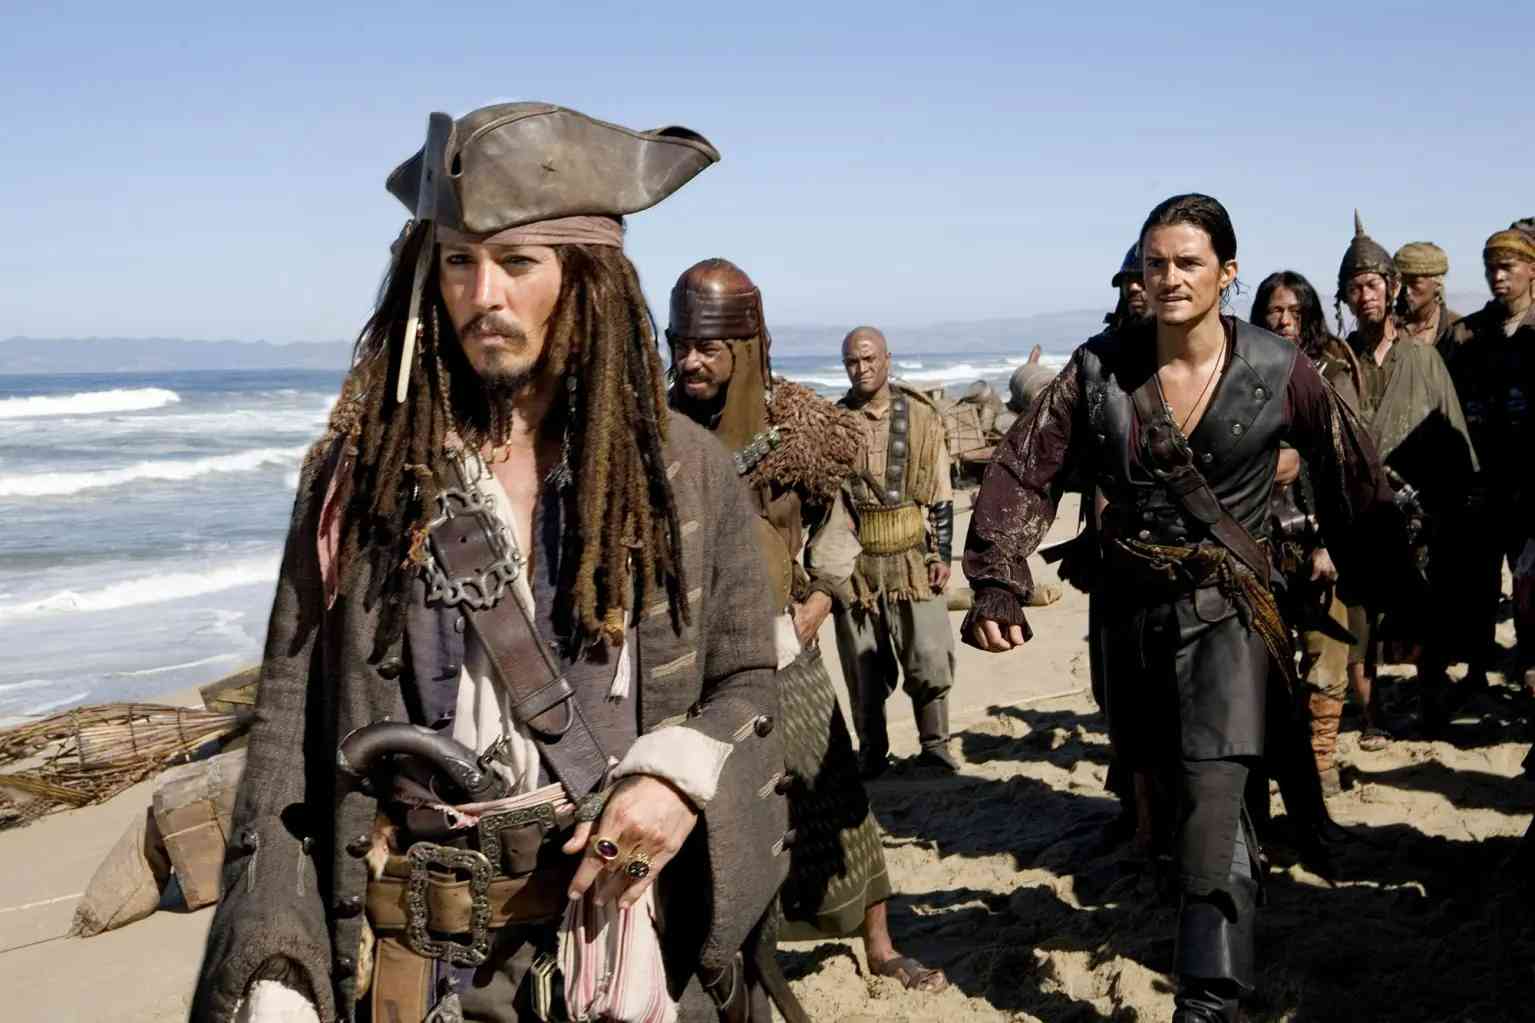 Pirates-of-the-Caribbean:-At-World's-End-in-South Korea